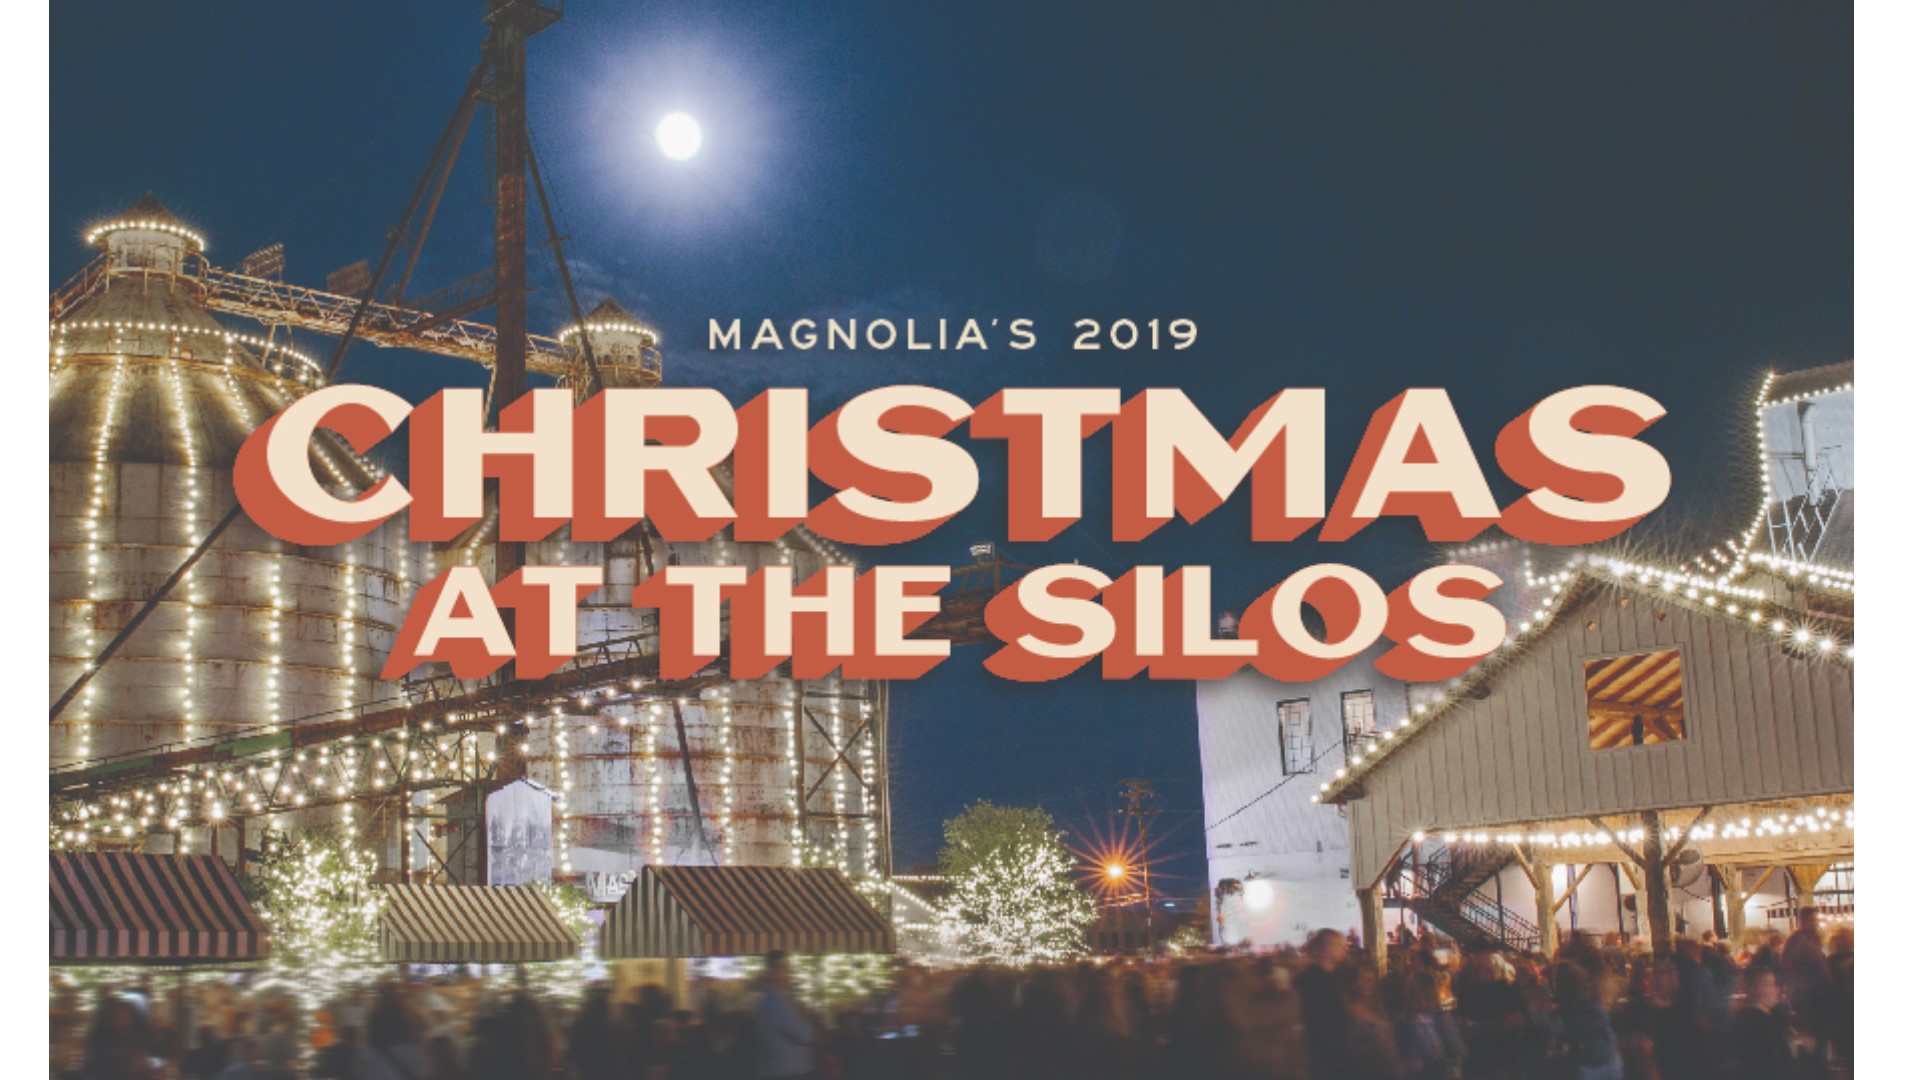 Locals night at 'Christmas at the Silos' is supporting a great cause